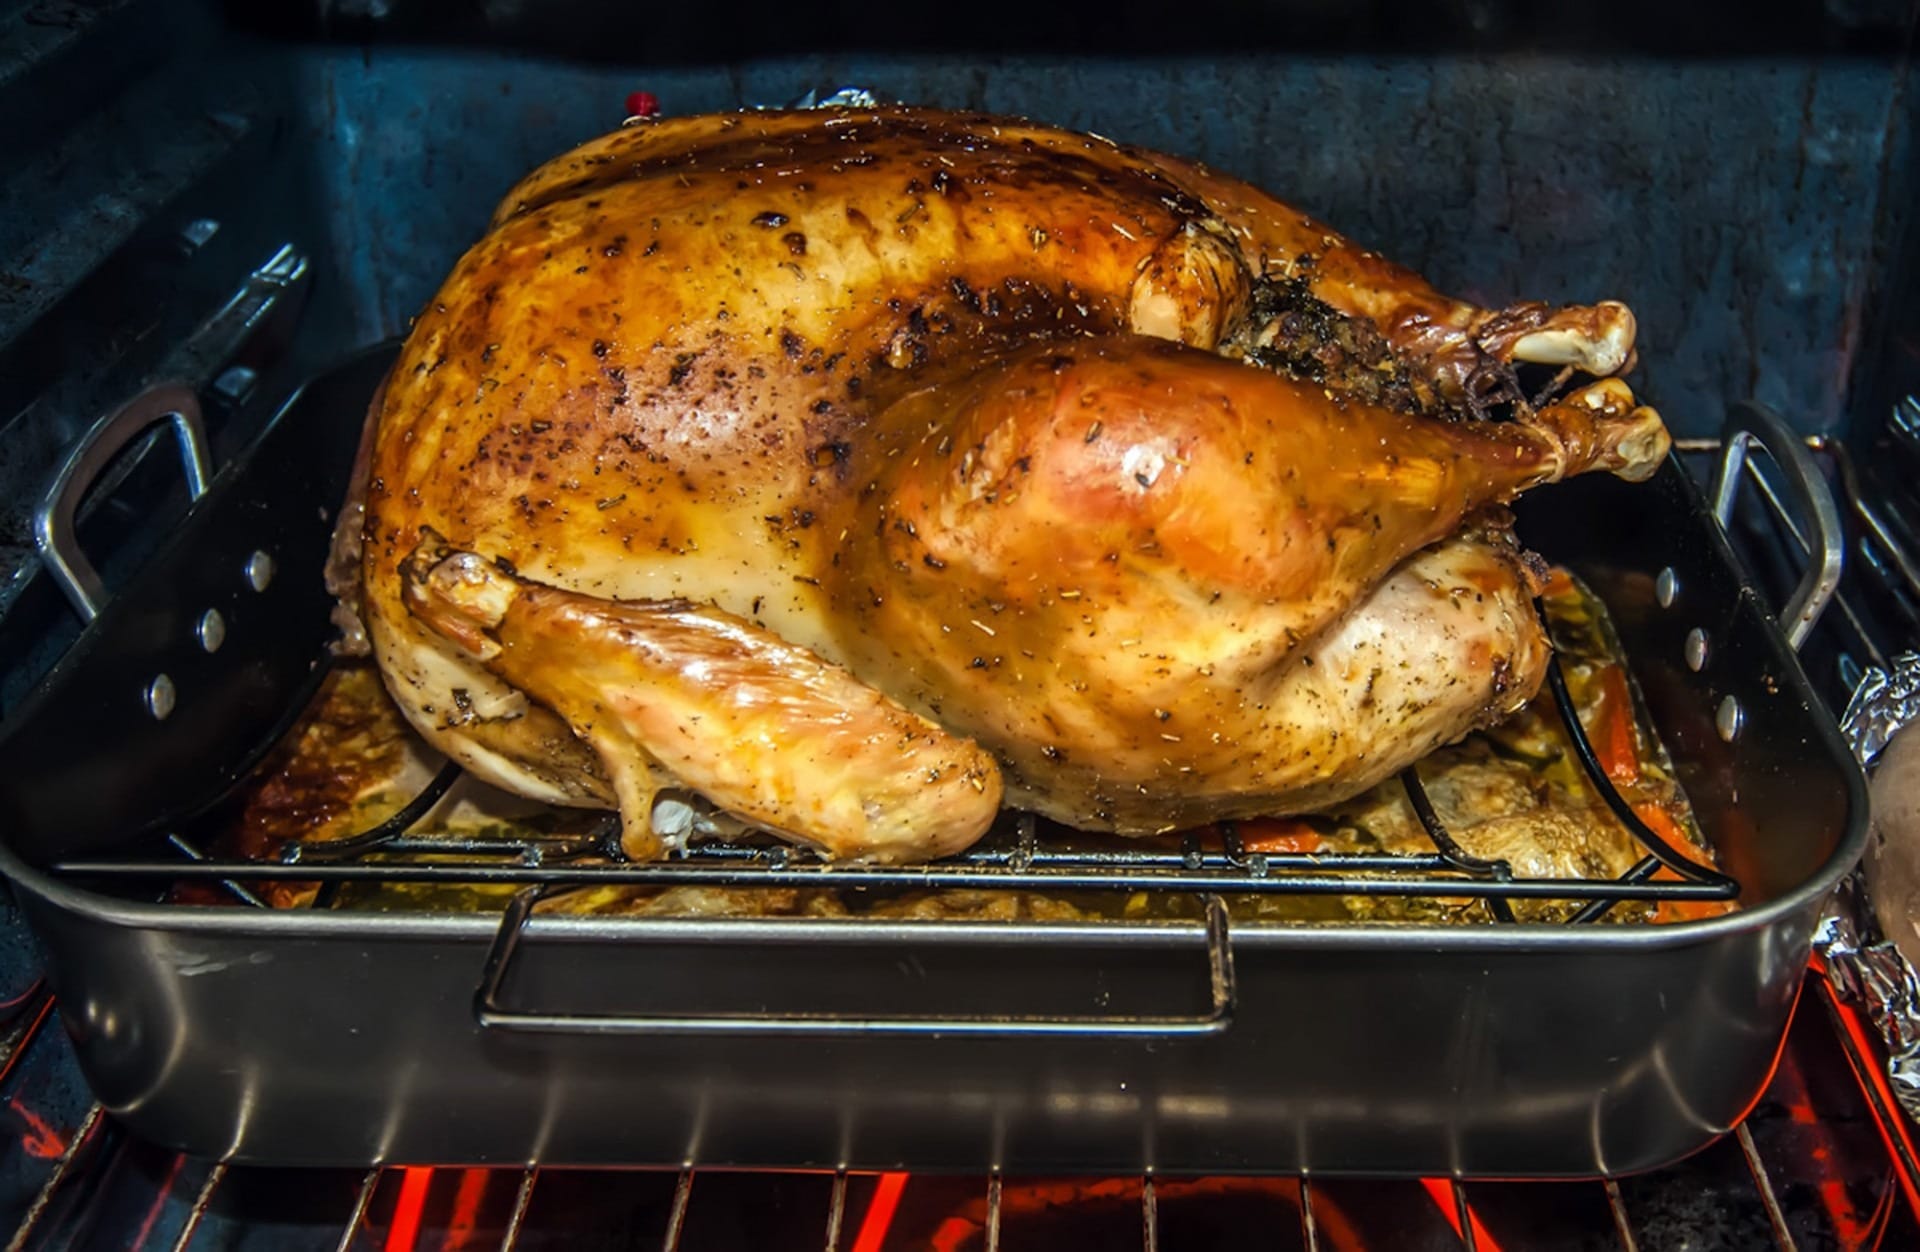 How to roast a turkey without making your guests sick